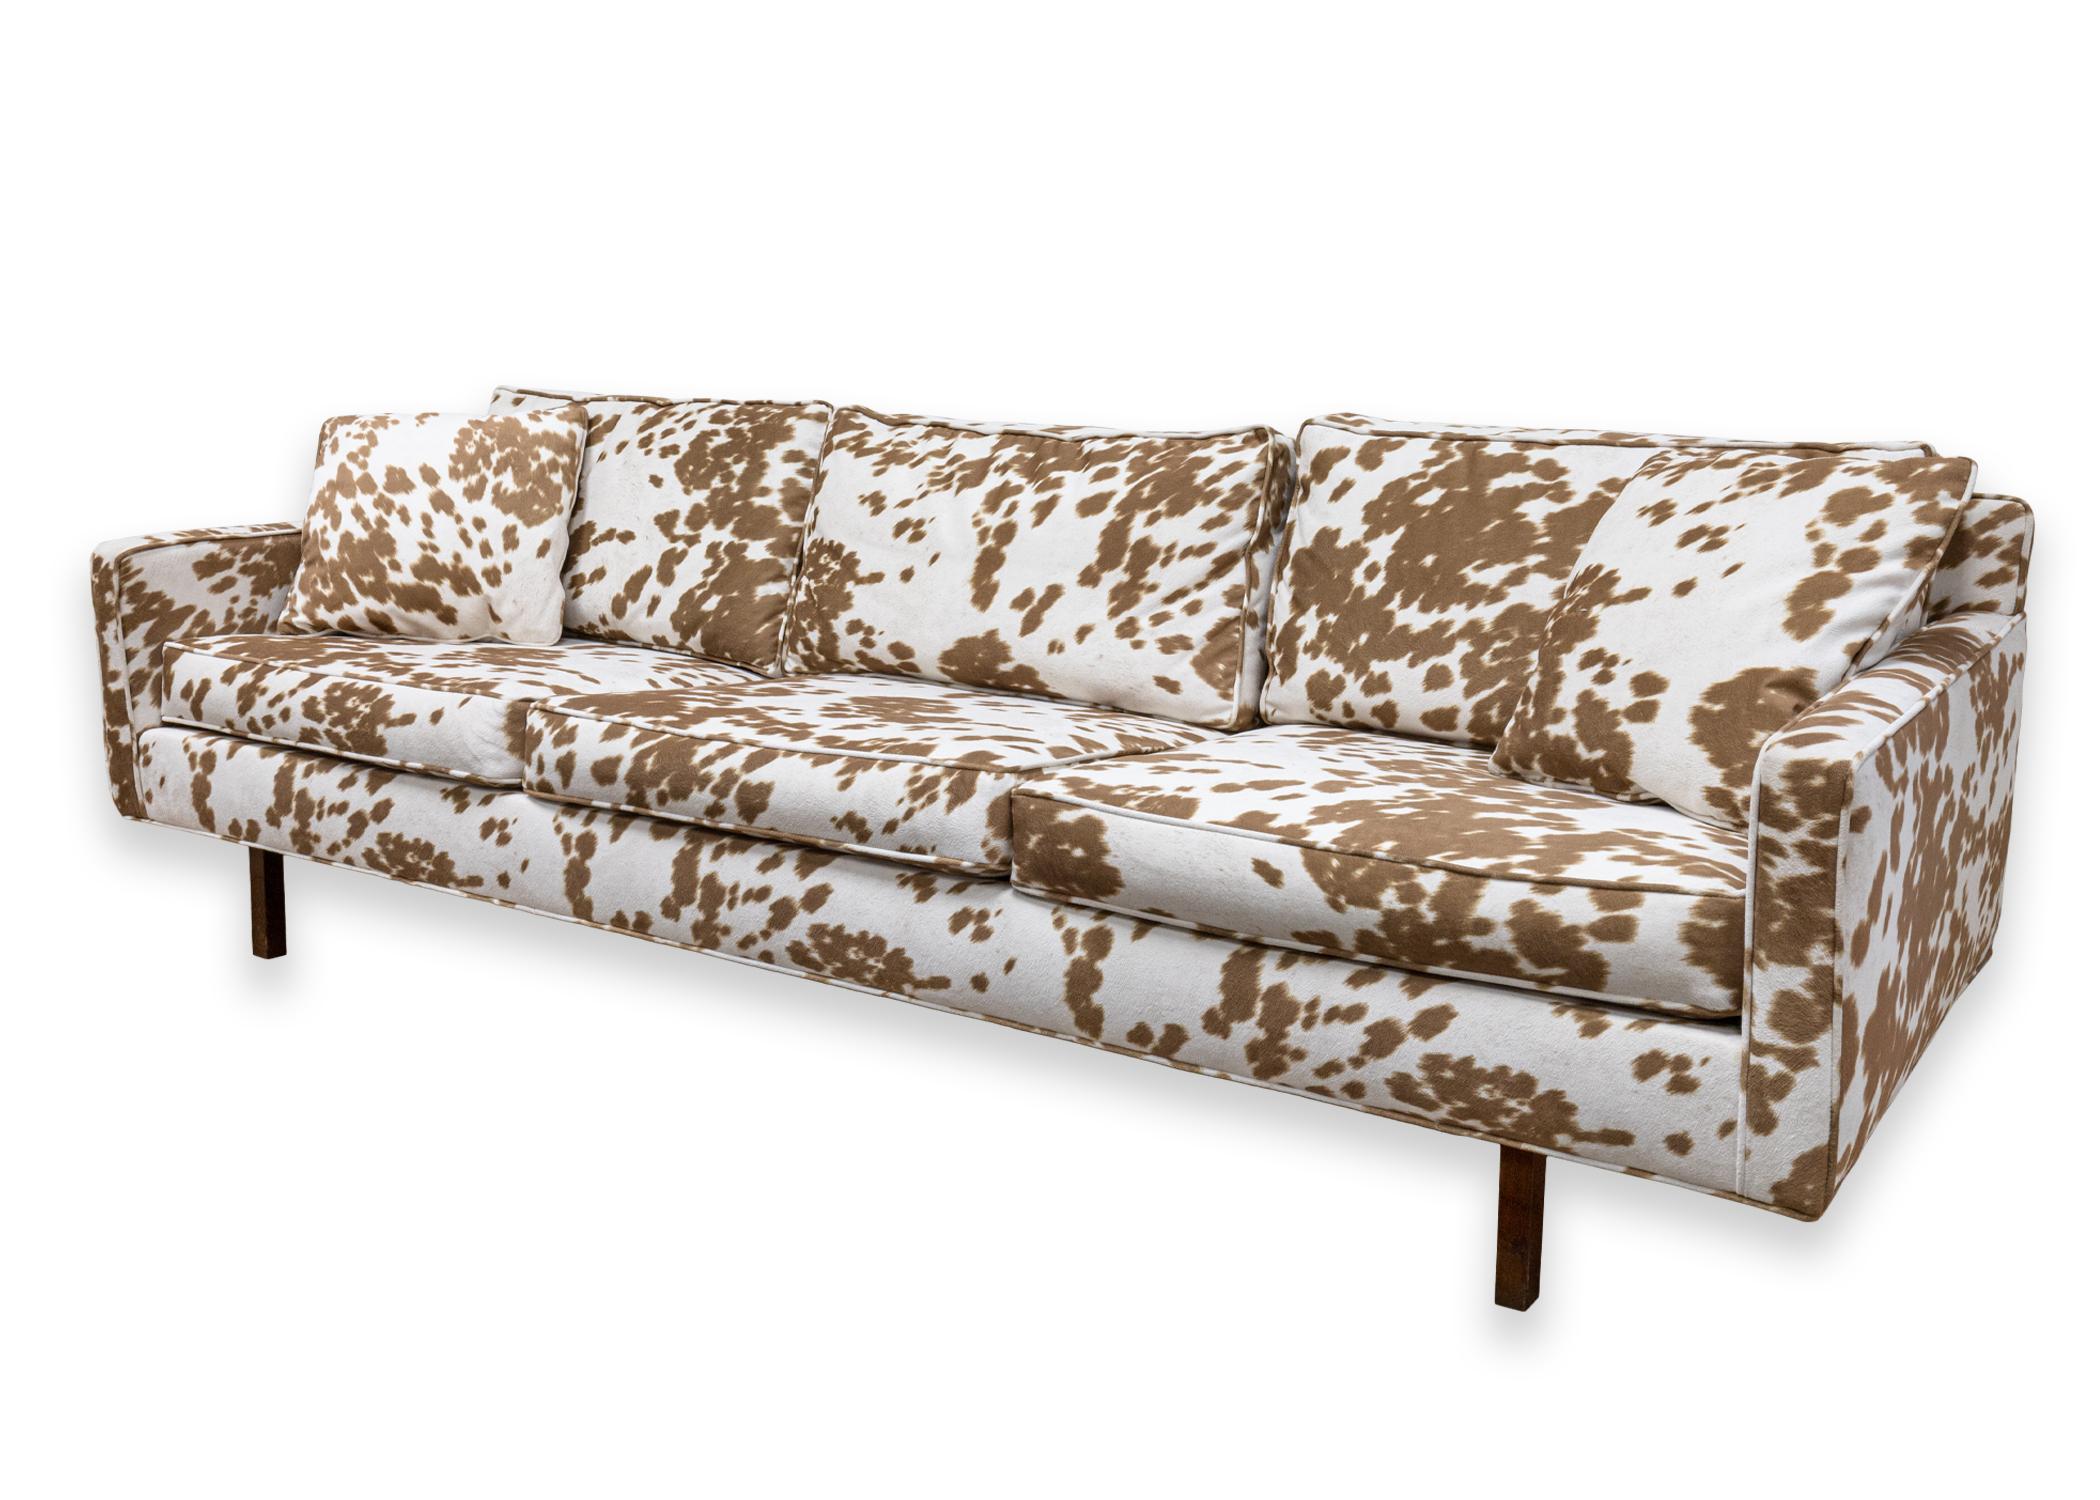 A Milo Baughman Style Directional sofa. A wonderful sofa featuring a super unique brown and white cow print upholstery. This sofa features removable cushions, two matching throw pillows, and exposed wooden legs. This sofa is in very good condition.